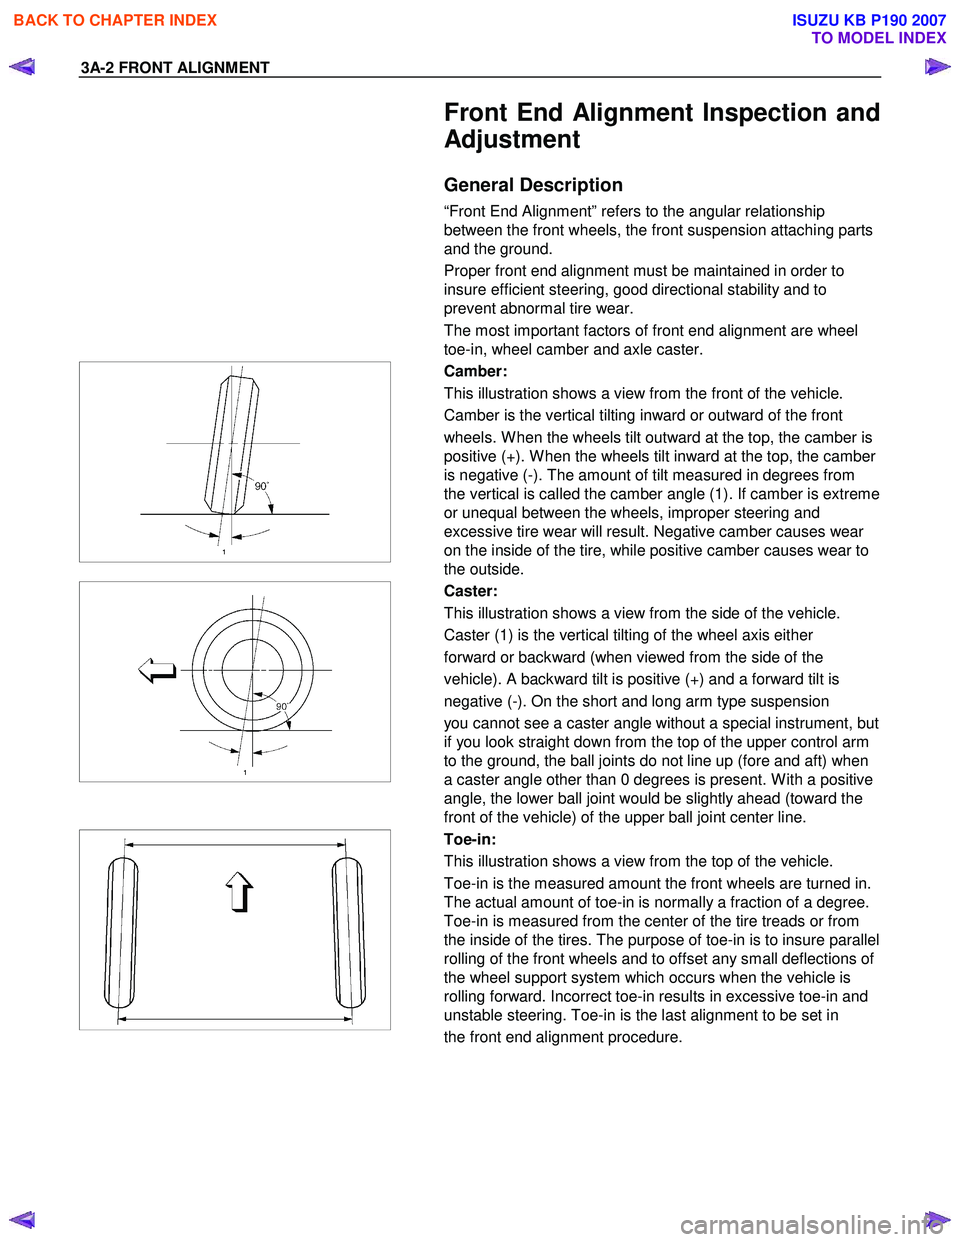 ISUZU KB P190 2007  Workshop Repair Manual 3A-2 FRONT ALIGNMENT 
  
Front End Alignment Inspection and 
Adjustment 
General Description 
“Front End Alignment” refers to the angular relationship  
between the front wheels, the front suspens